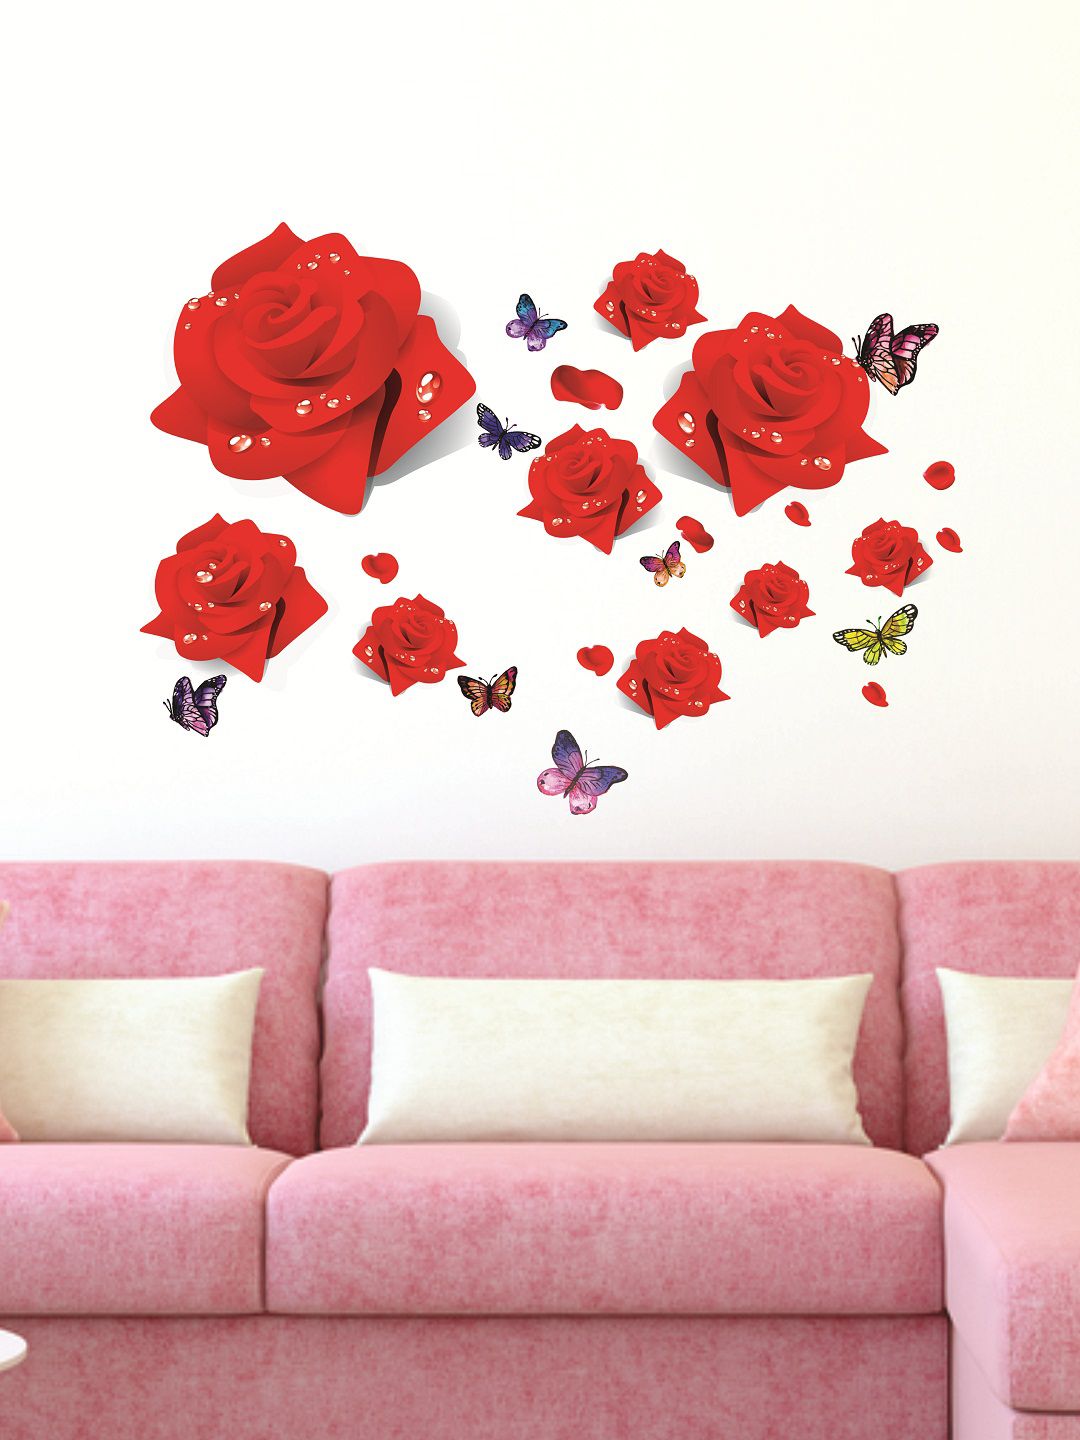 WALLSTICK Red & Purple Butterfly & Flowers Large Vinyl Wall Sticker Price in India